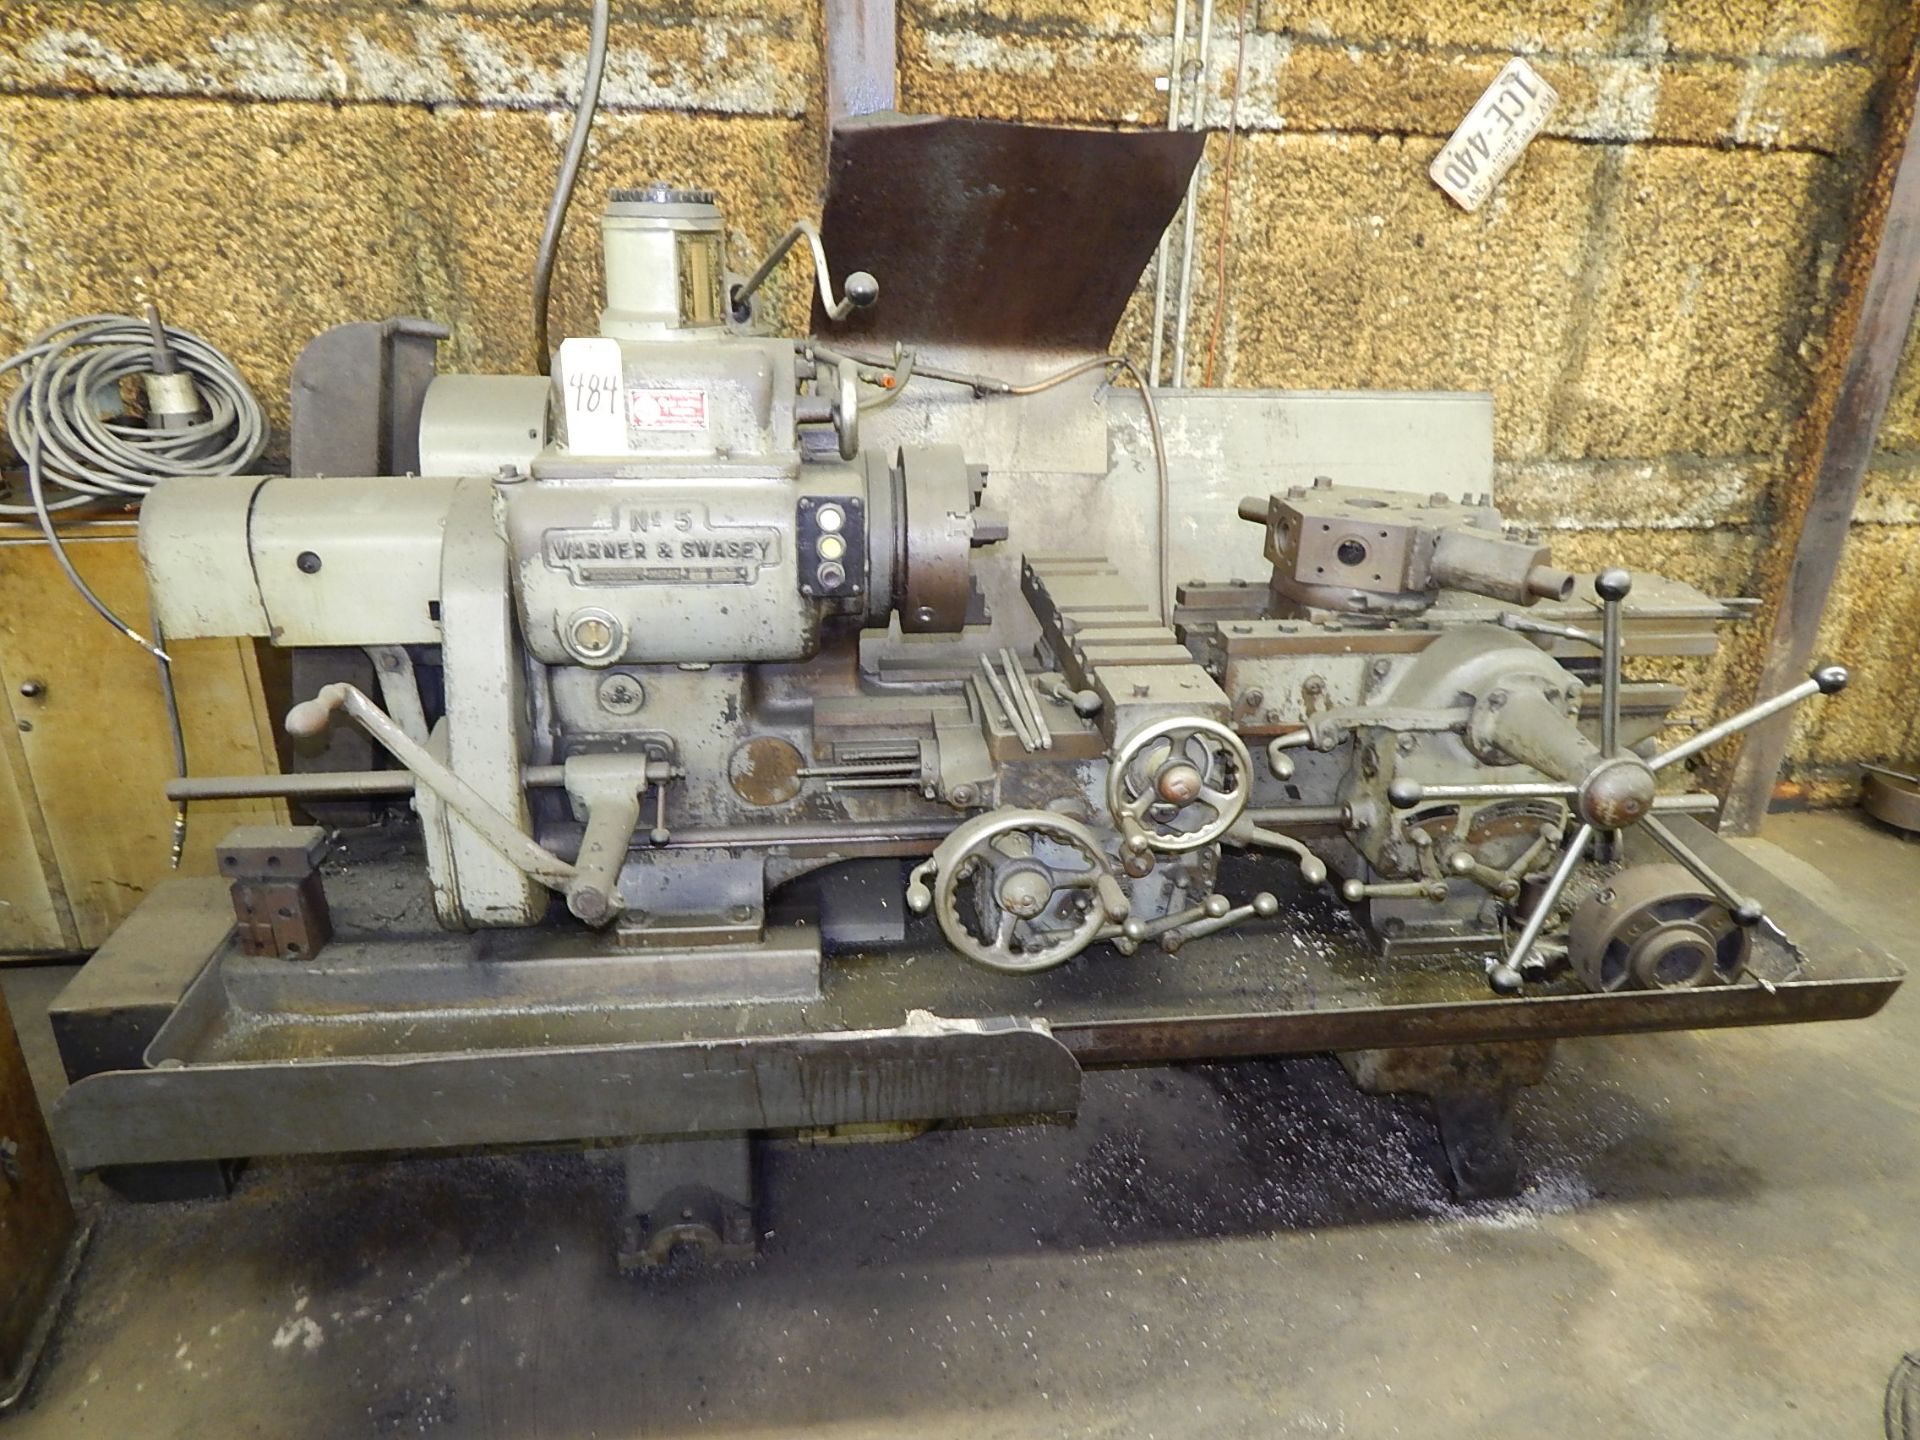 Warner & Swasey #5 Turret Lathe, s/n 622965, Model M-1740, 12 In. 3-Jaw Chuck, 4 Way Tool Post,